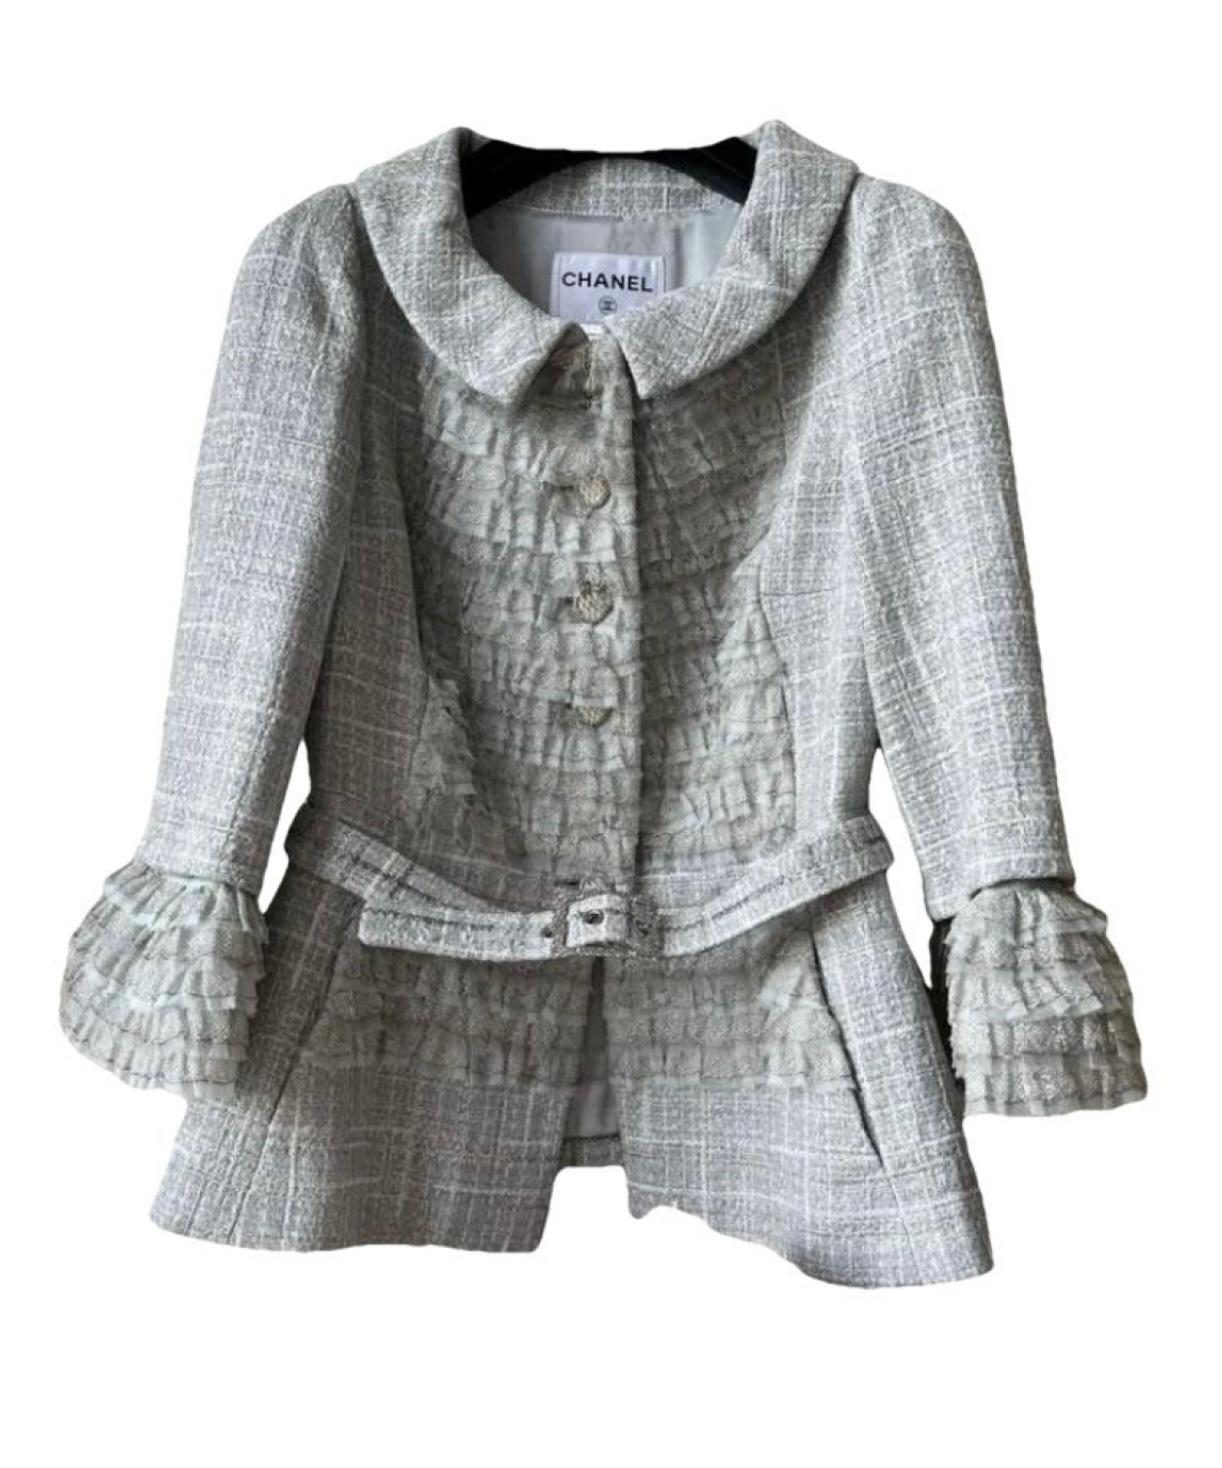 Chanel Collectible Cara Delevingne Style Tweed Jacket For Sale 4